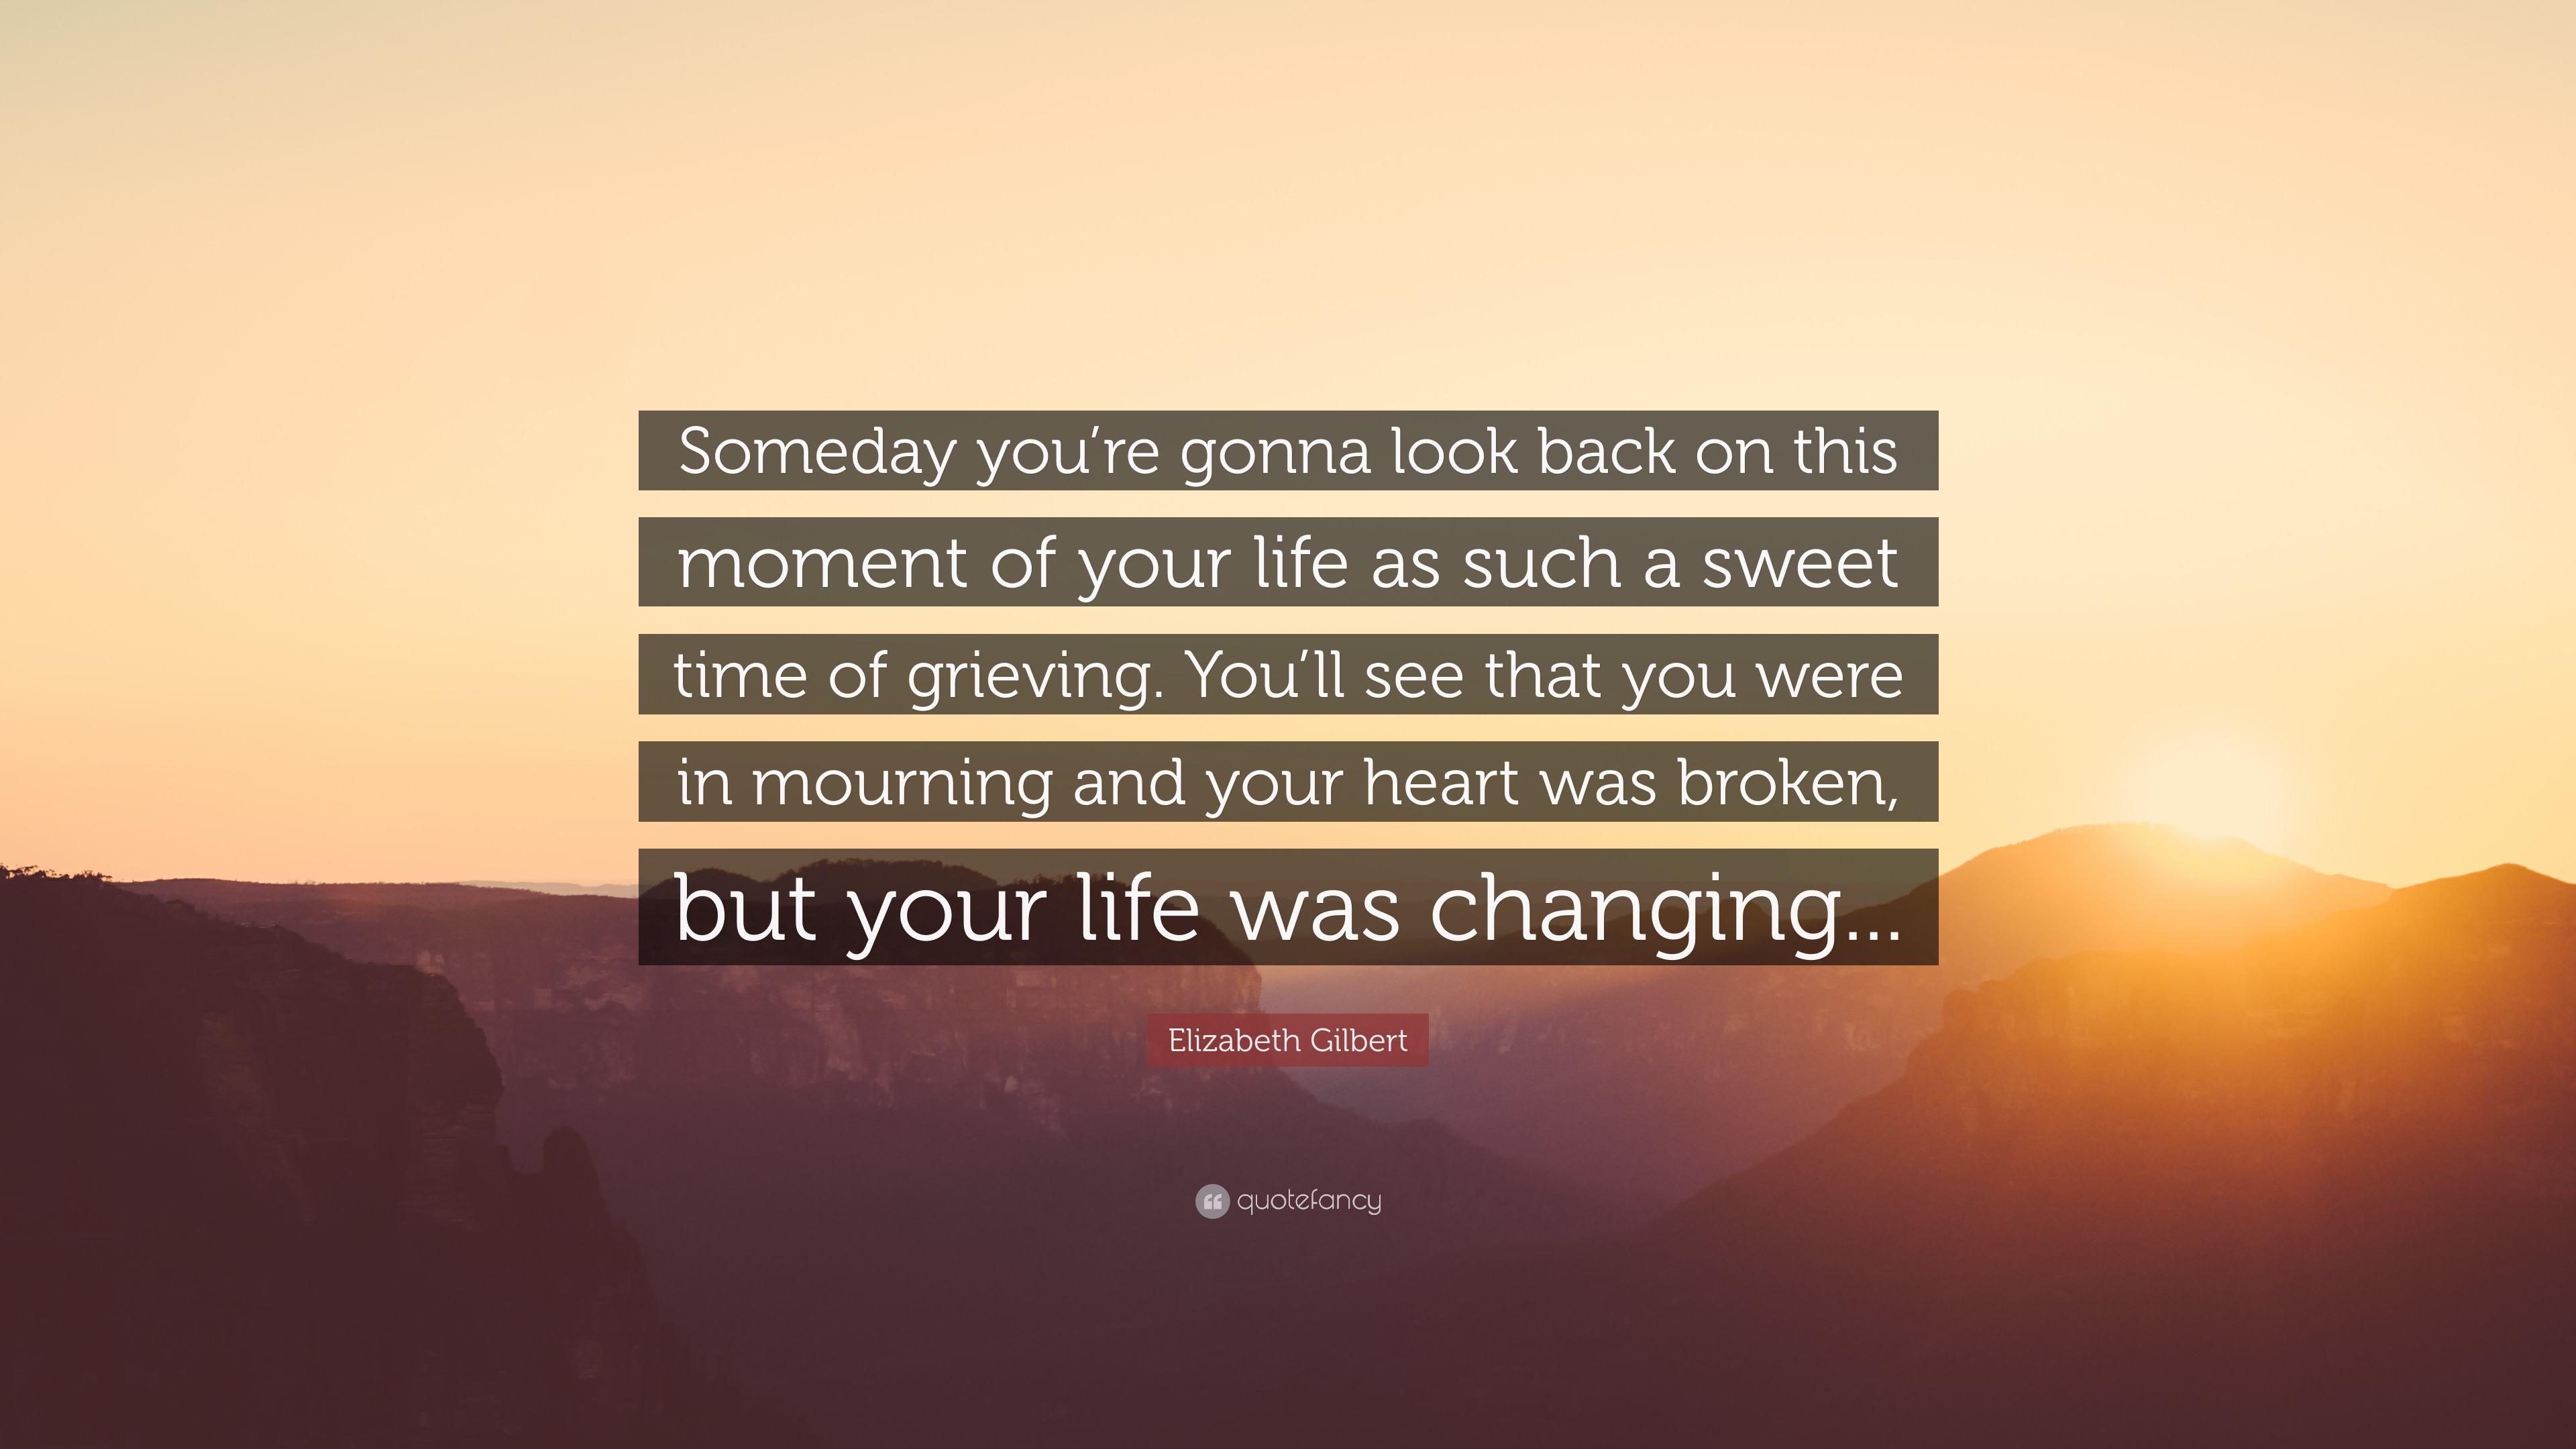 Elizabeth Gilbert Quote “Someday you re gonna look back on this moment of